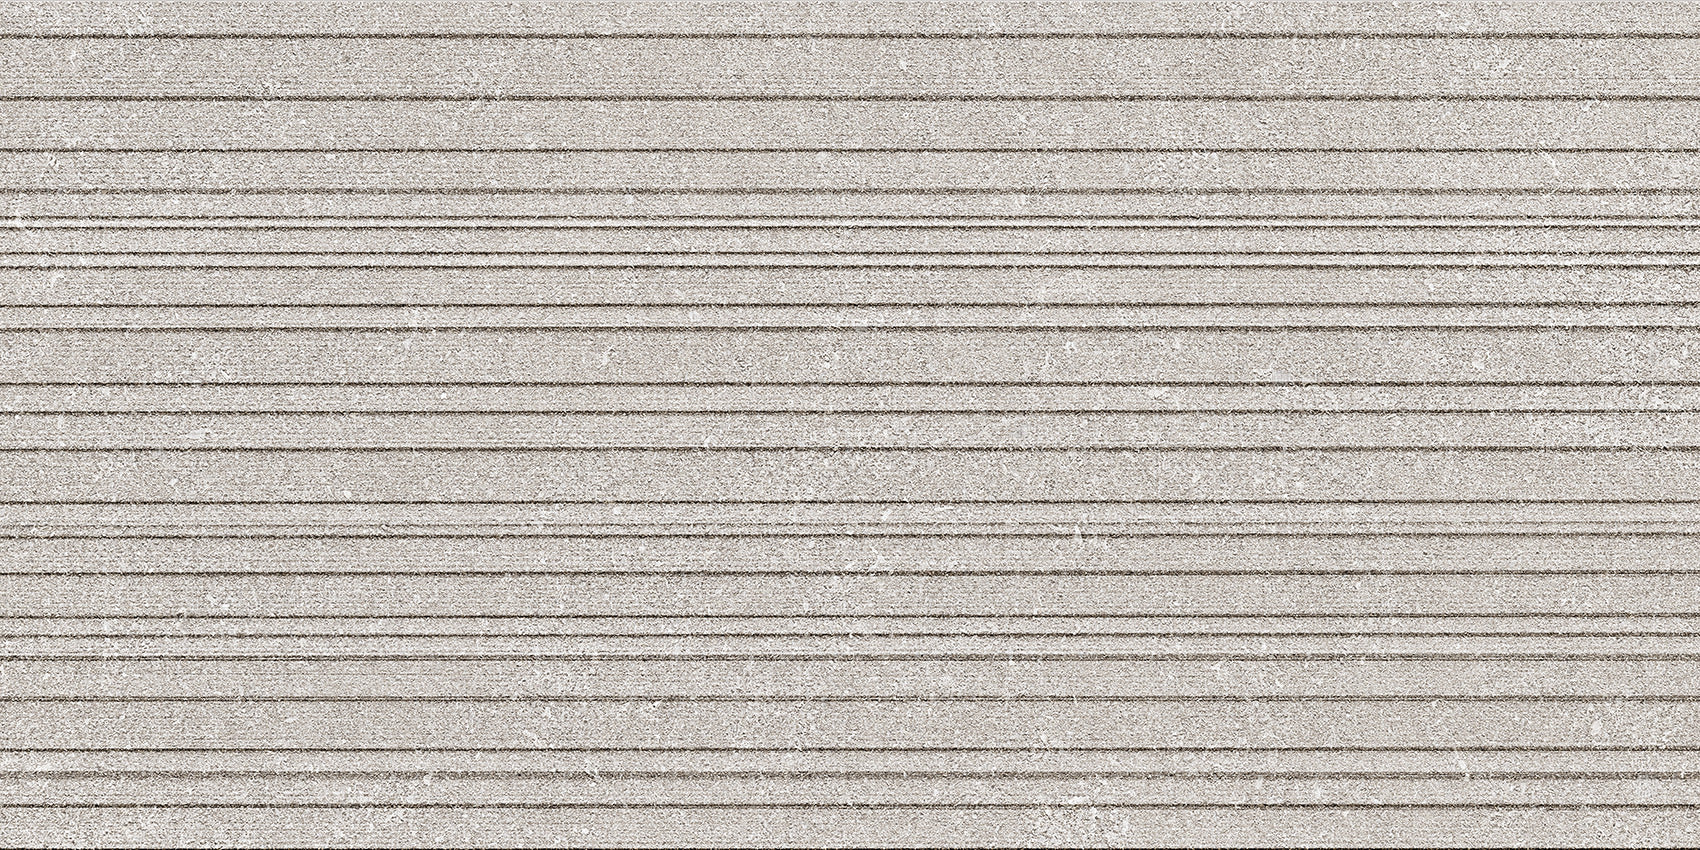 landmark 9 mm atelier grey indiana salem grove dynamic wall field tile 12x24x9mm matte rectified porcelain tile distributed by surface group international